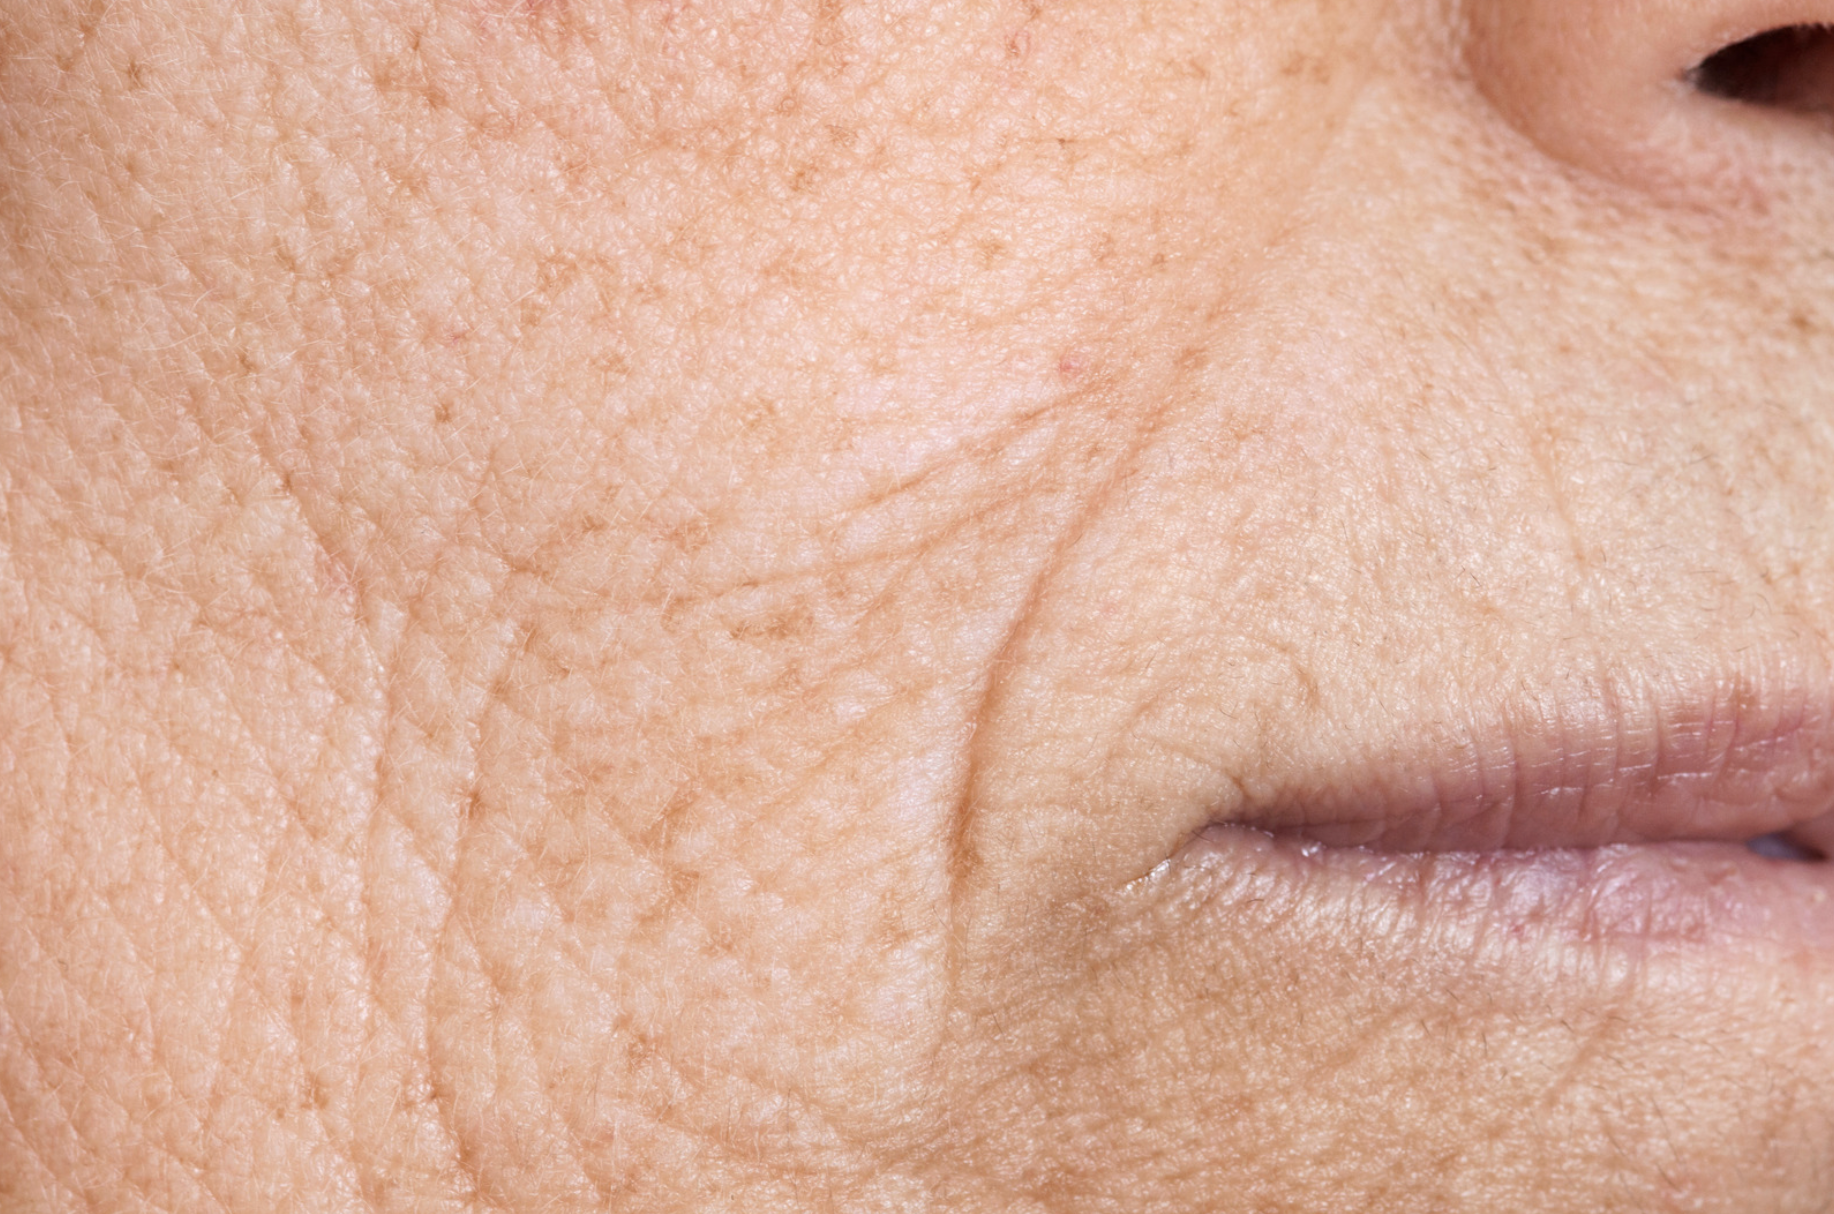 Can deep wrinkles be treated as easily as fine lines? The best treatments